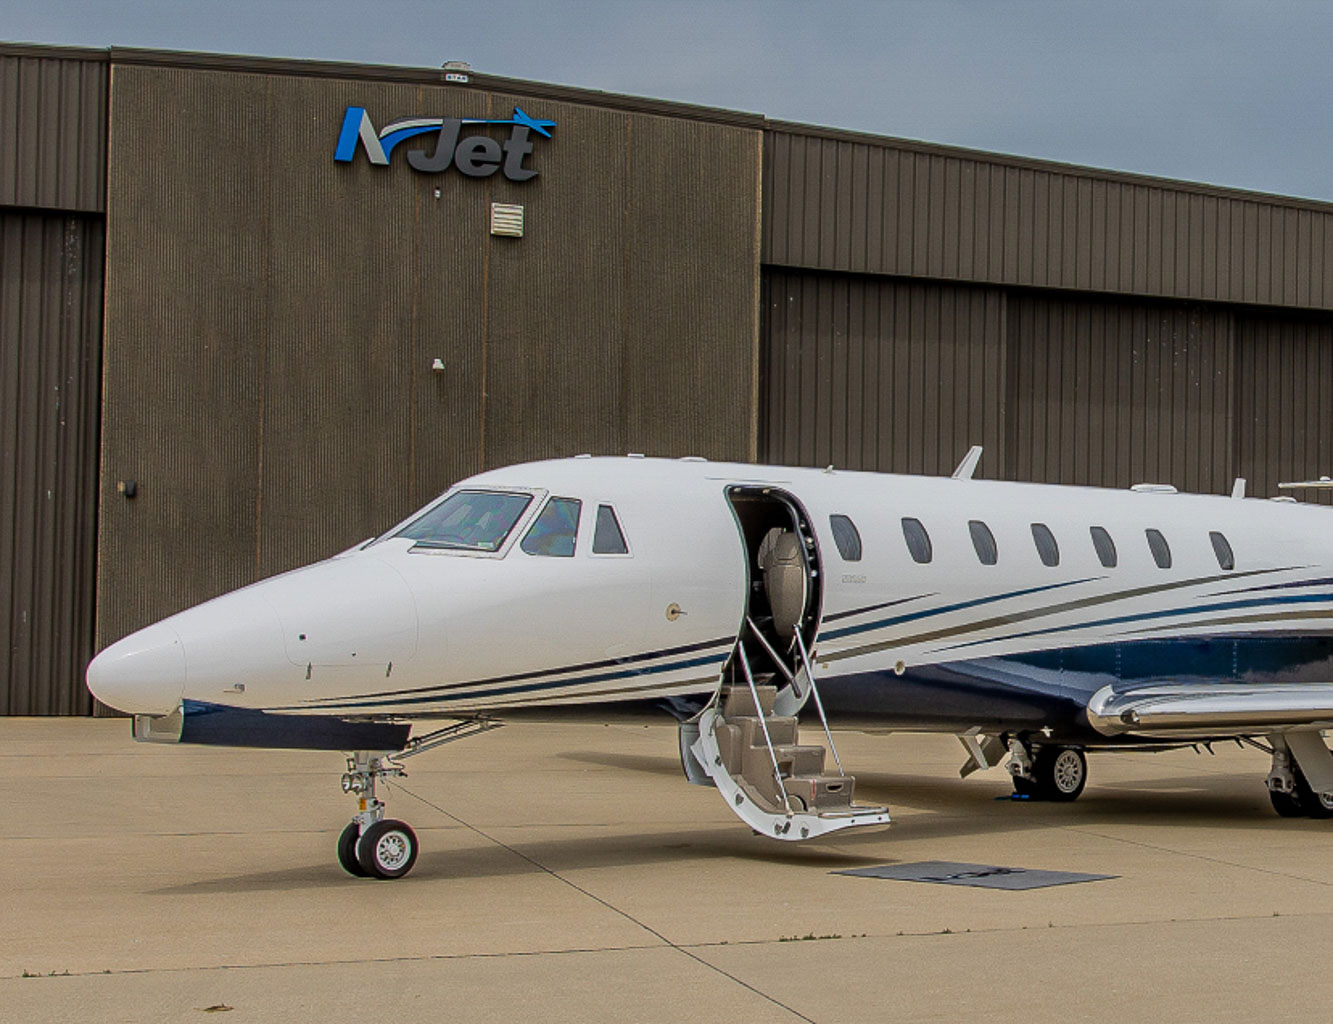 A private jet with an open door sitting outside a hangar